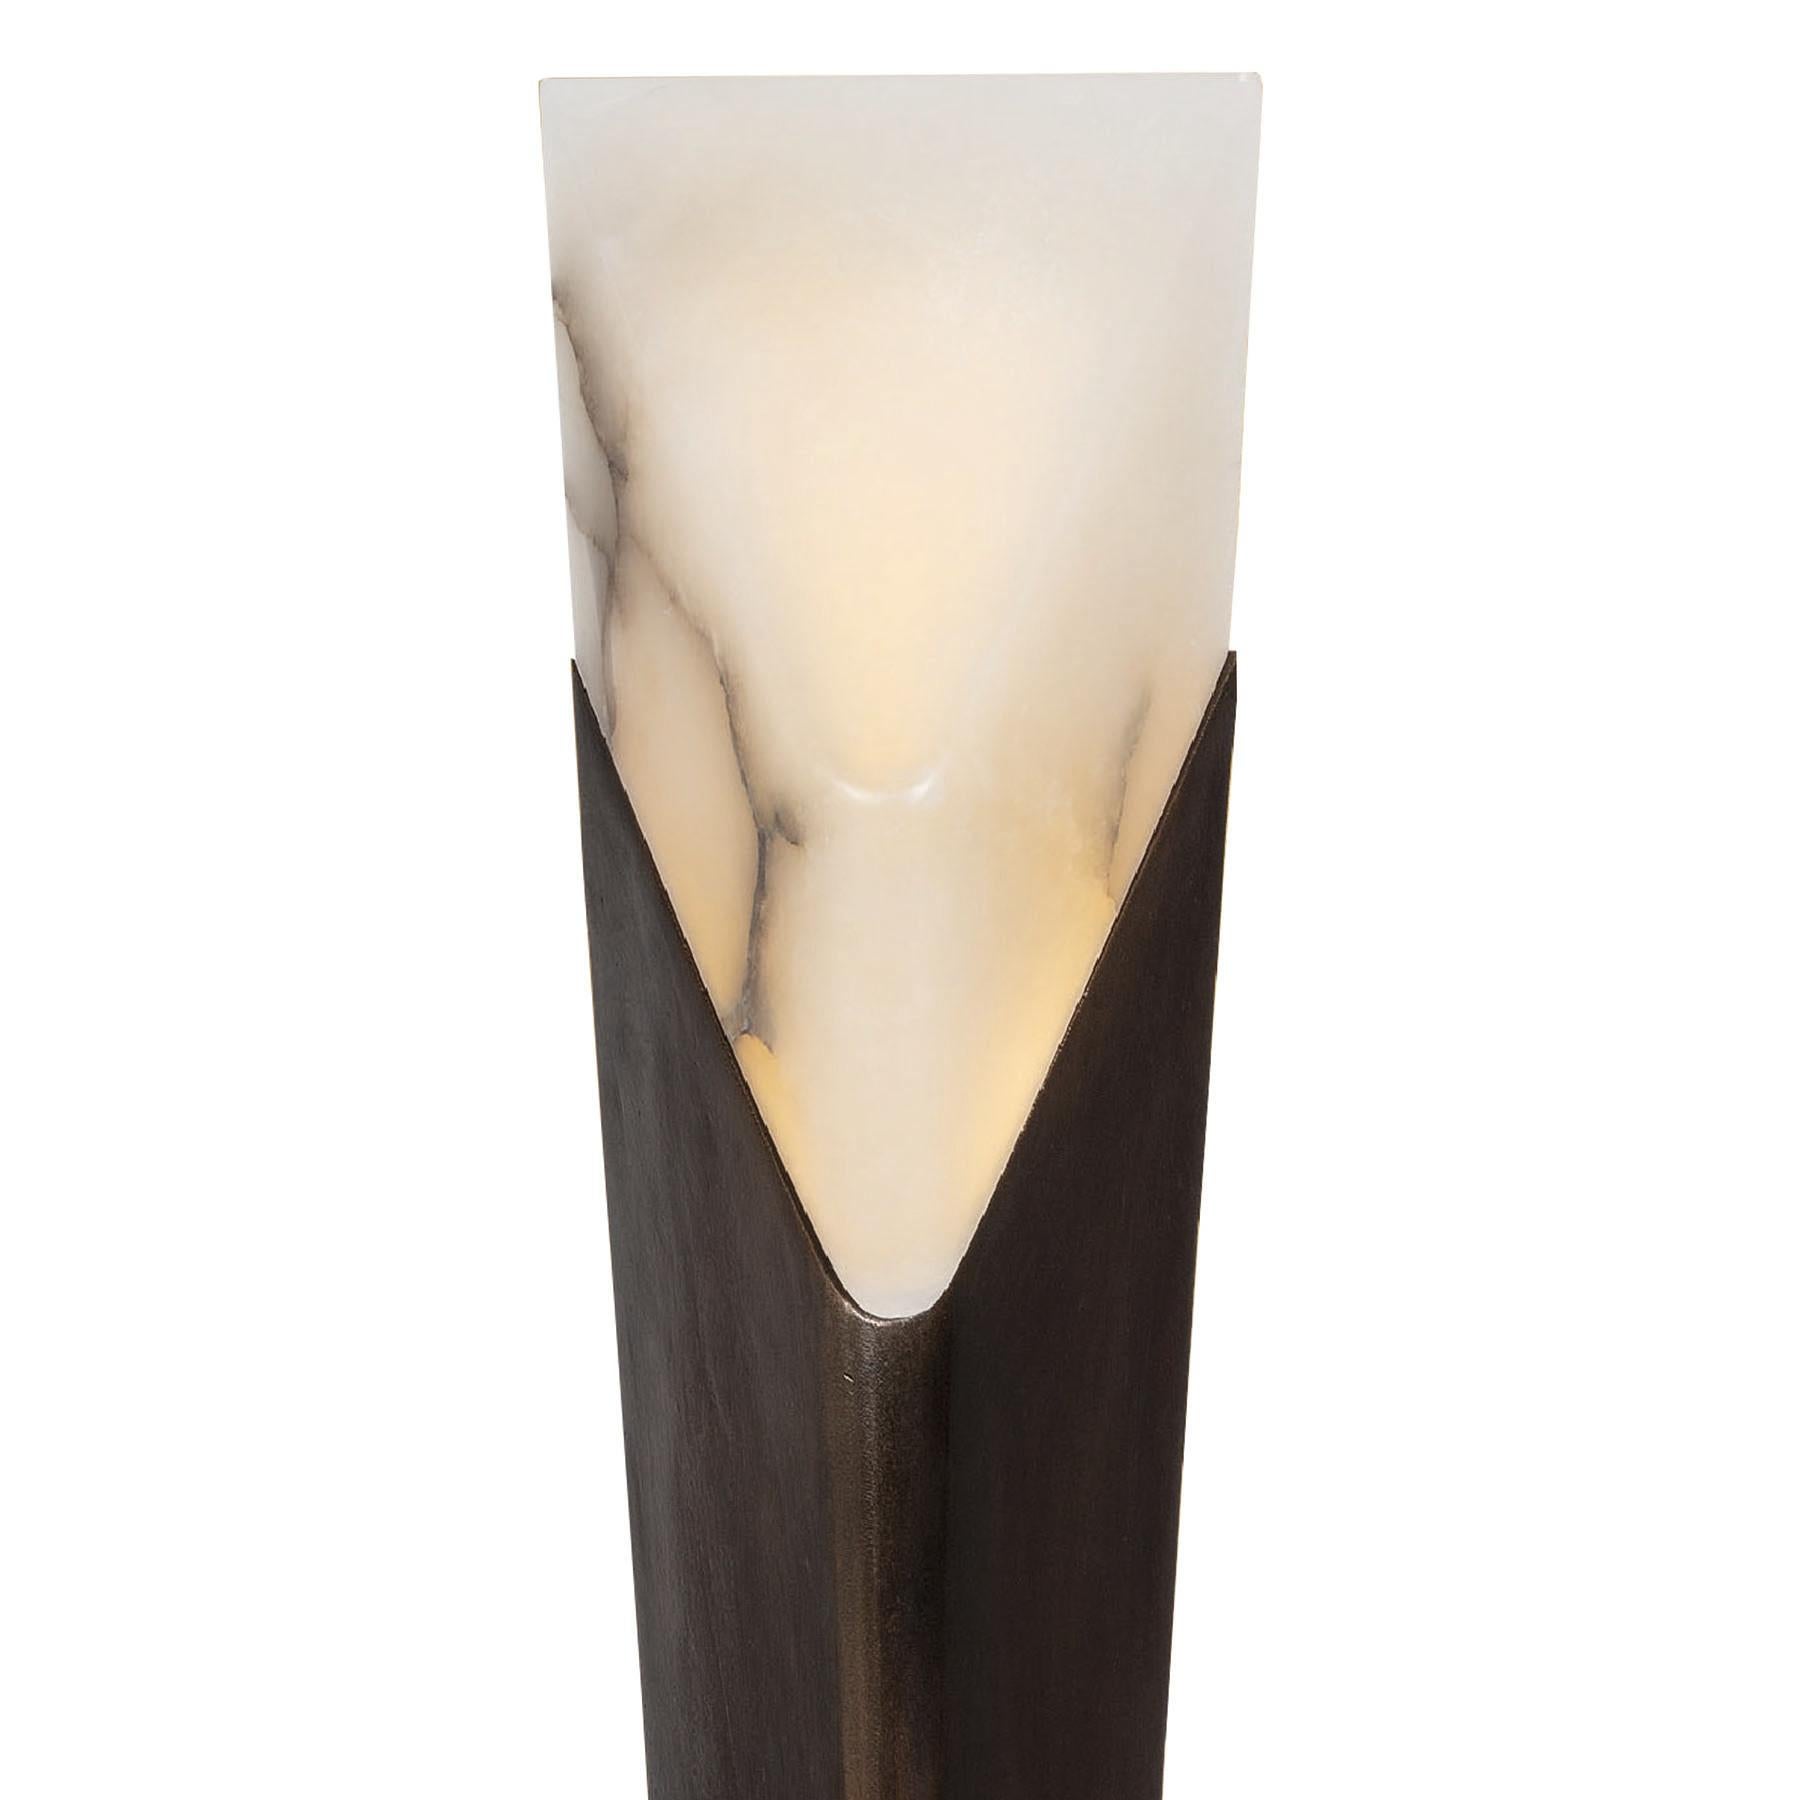 Table lamp pillar bronze in casted
bronze in medal finish. With alabaster
lamp part. With 12Watt Led bulb and
dimmer, 220-240 Volt, 50Hz.
bulb not included.
Also available in casted bronze in polished
mirror finish.